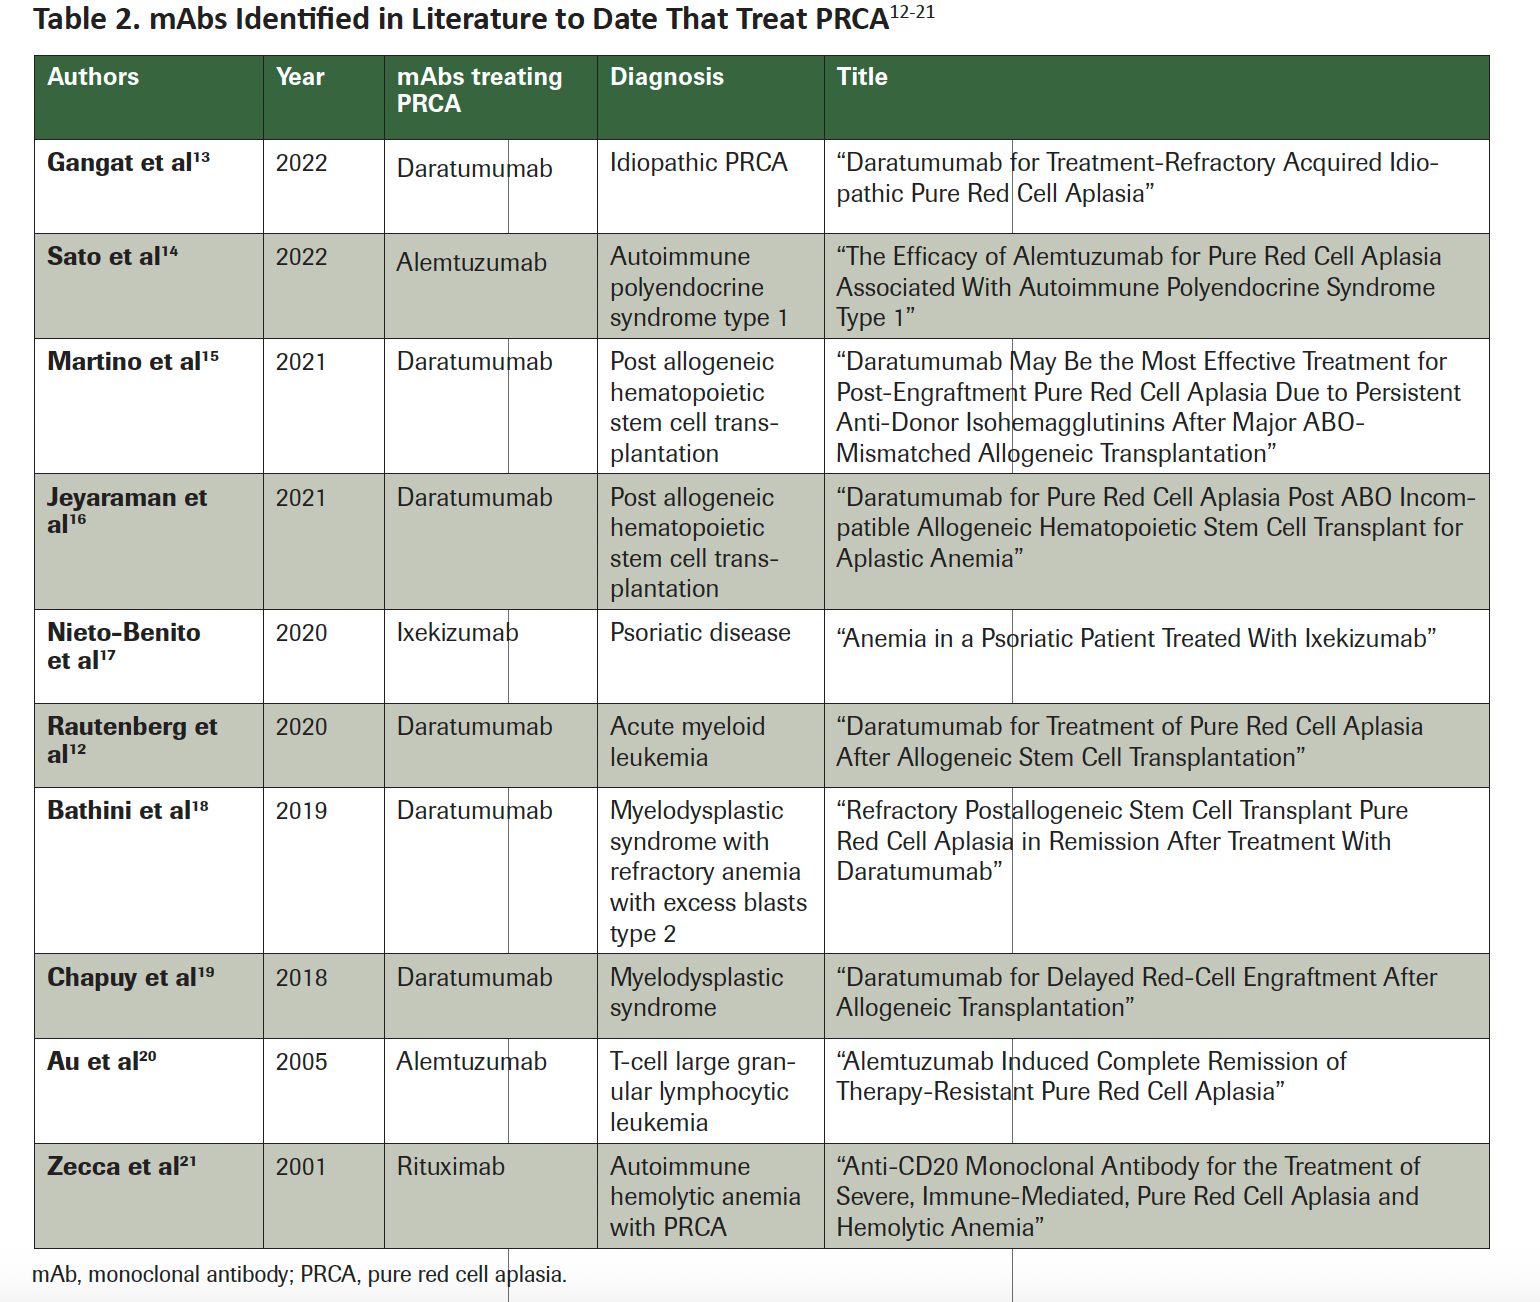 Table 2. mAbs Identified in Literature to Date That Treat PRCA12-21